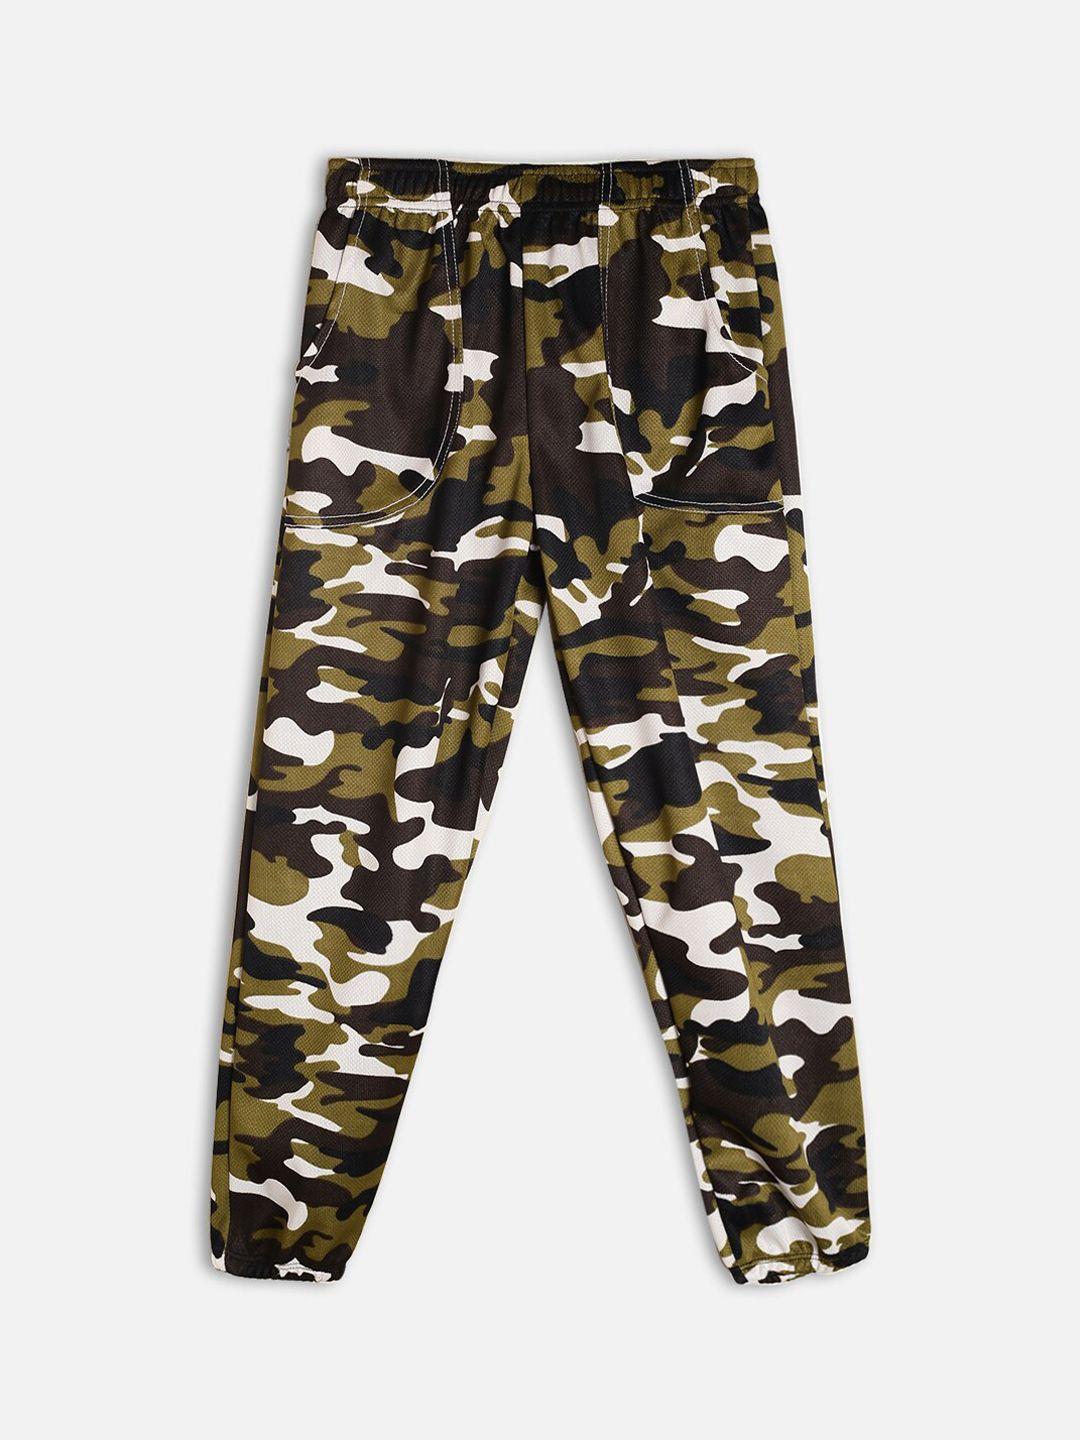 fashionable-boys-multi-colored-camouflage-printed-track-pants